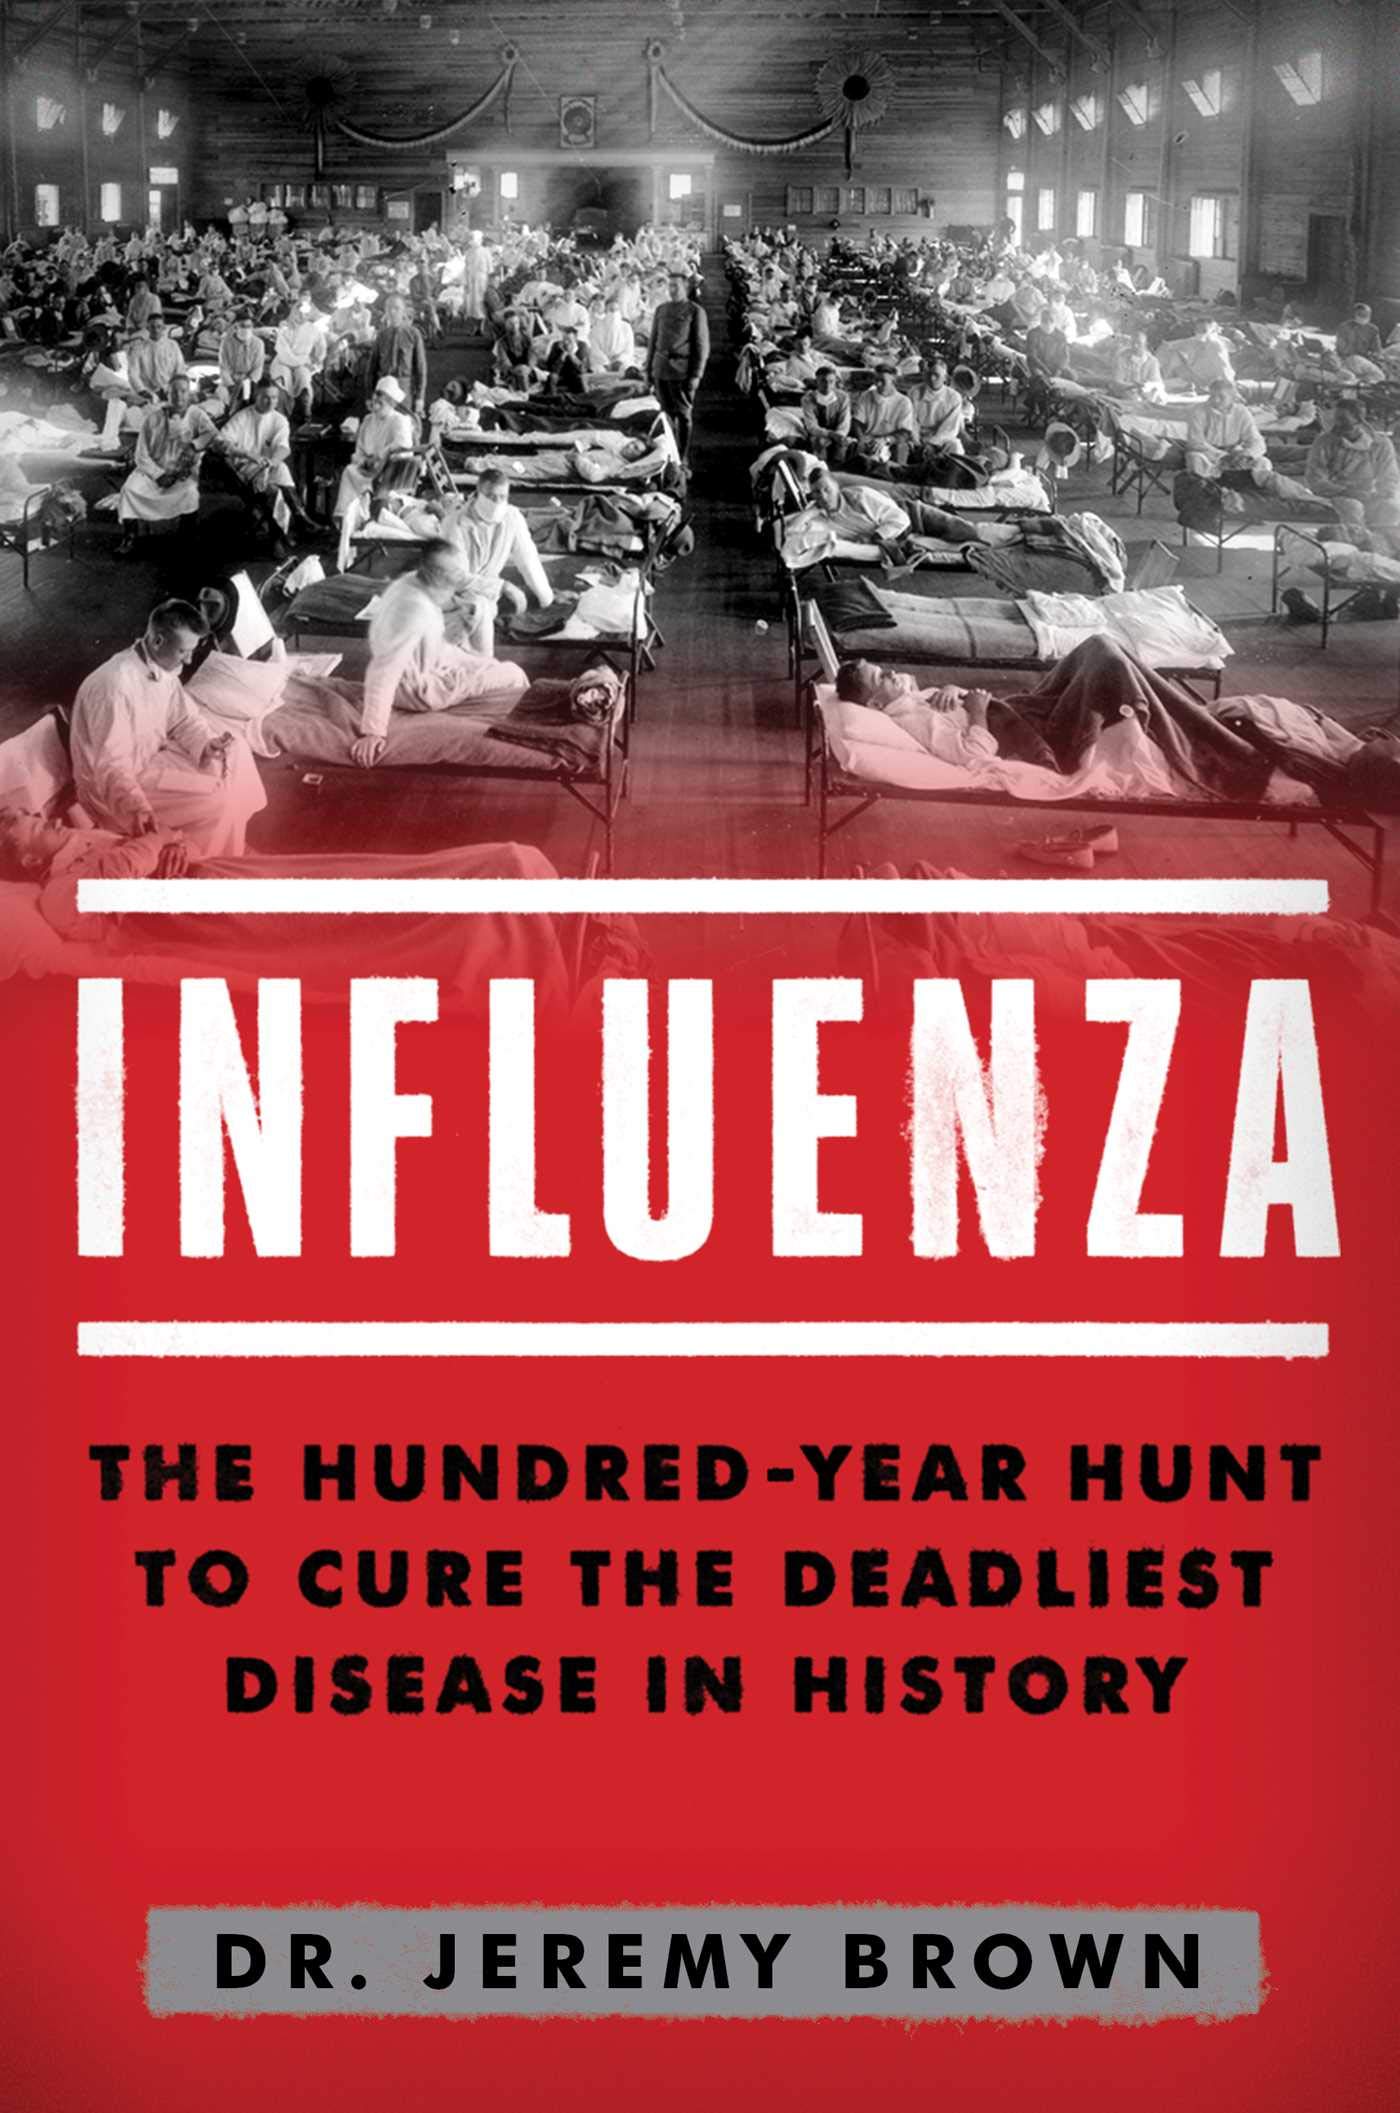 Influenza: The Hundred-year Hunt to Cure the Deadliest Disease in History